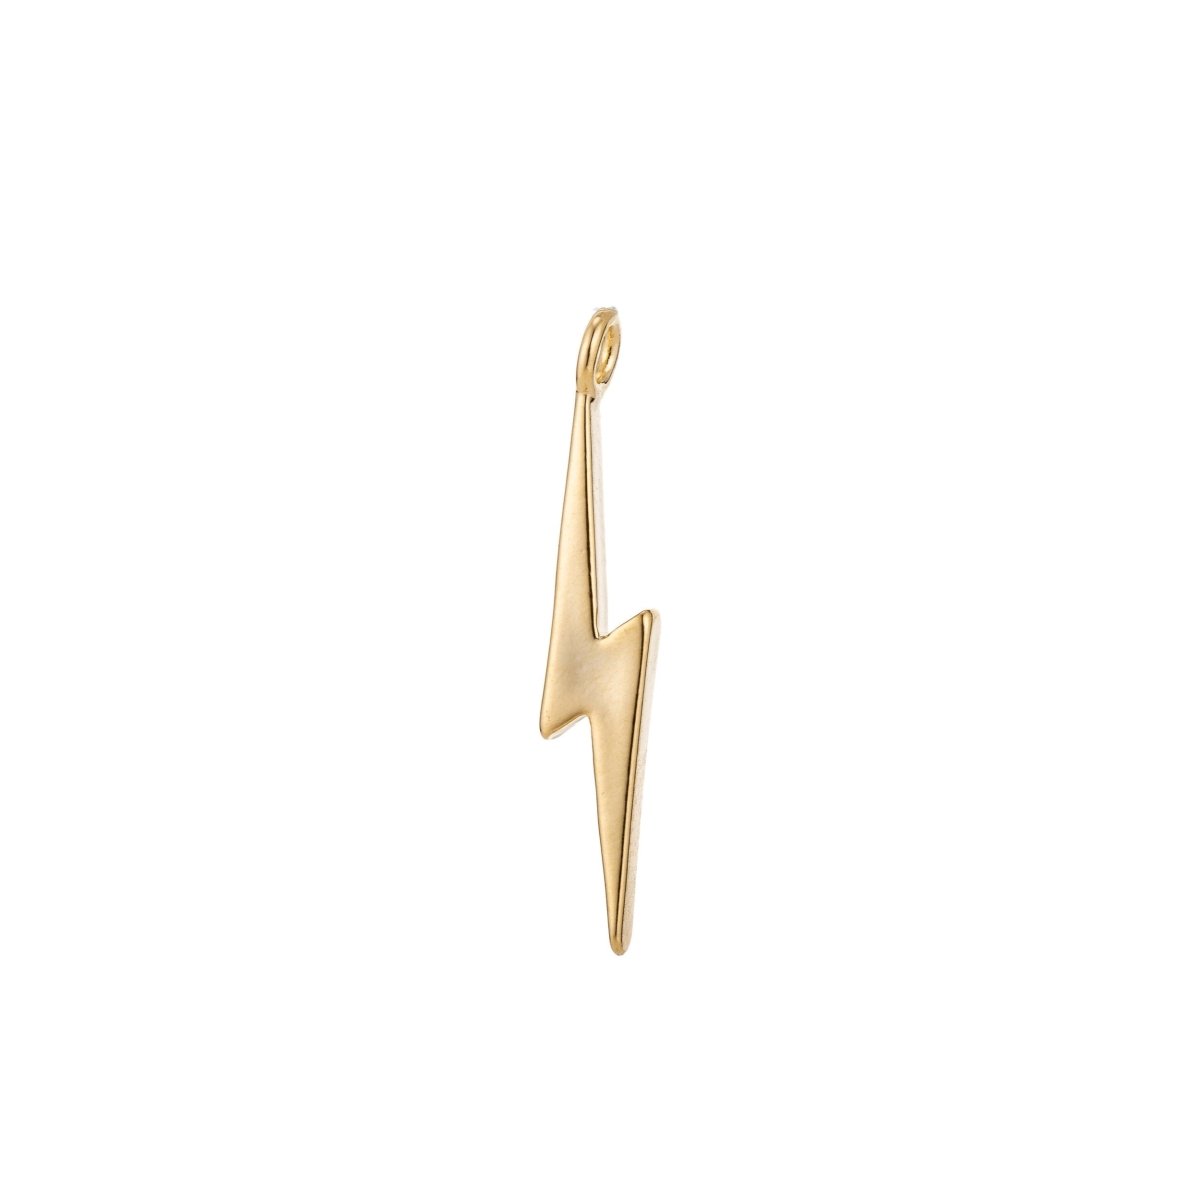 18K Gold Filled Teeny Tiny Lightning Bold Charms - 22mm x 4mm electric thunder storm bolt earring necklace jewelry supplies C-294 - DLUXCA